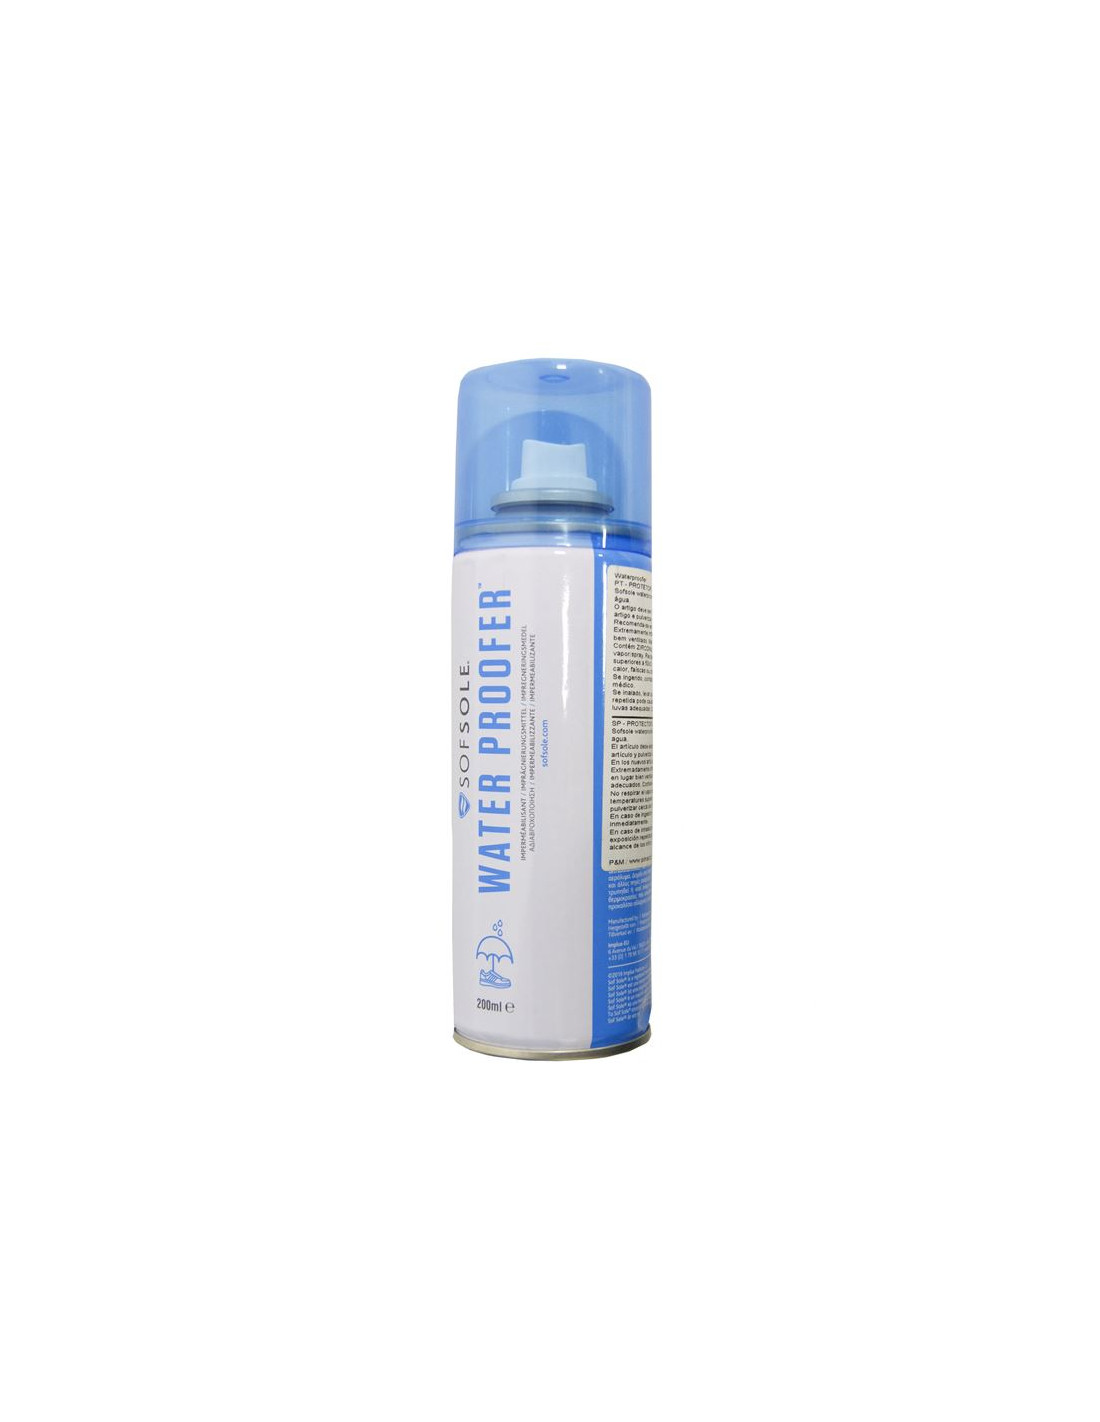 Spray impermeable sofsole water proofer 200 ml